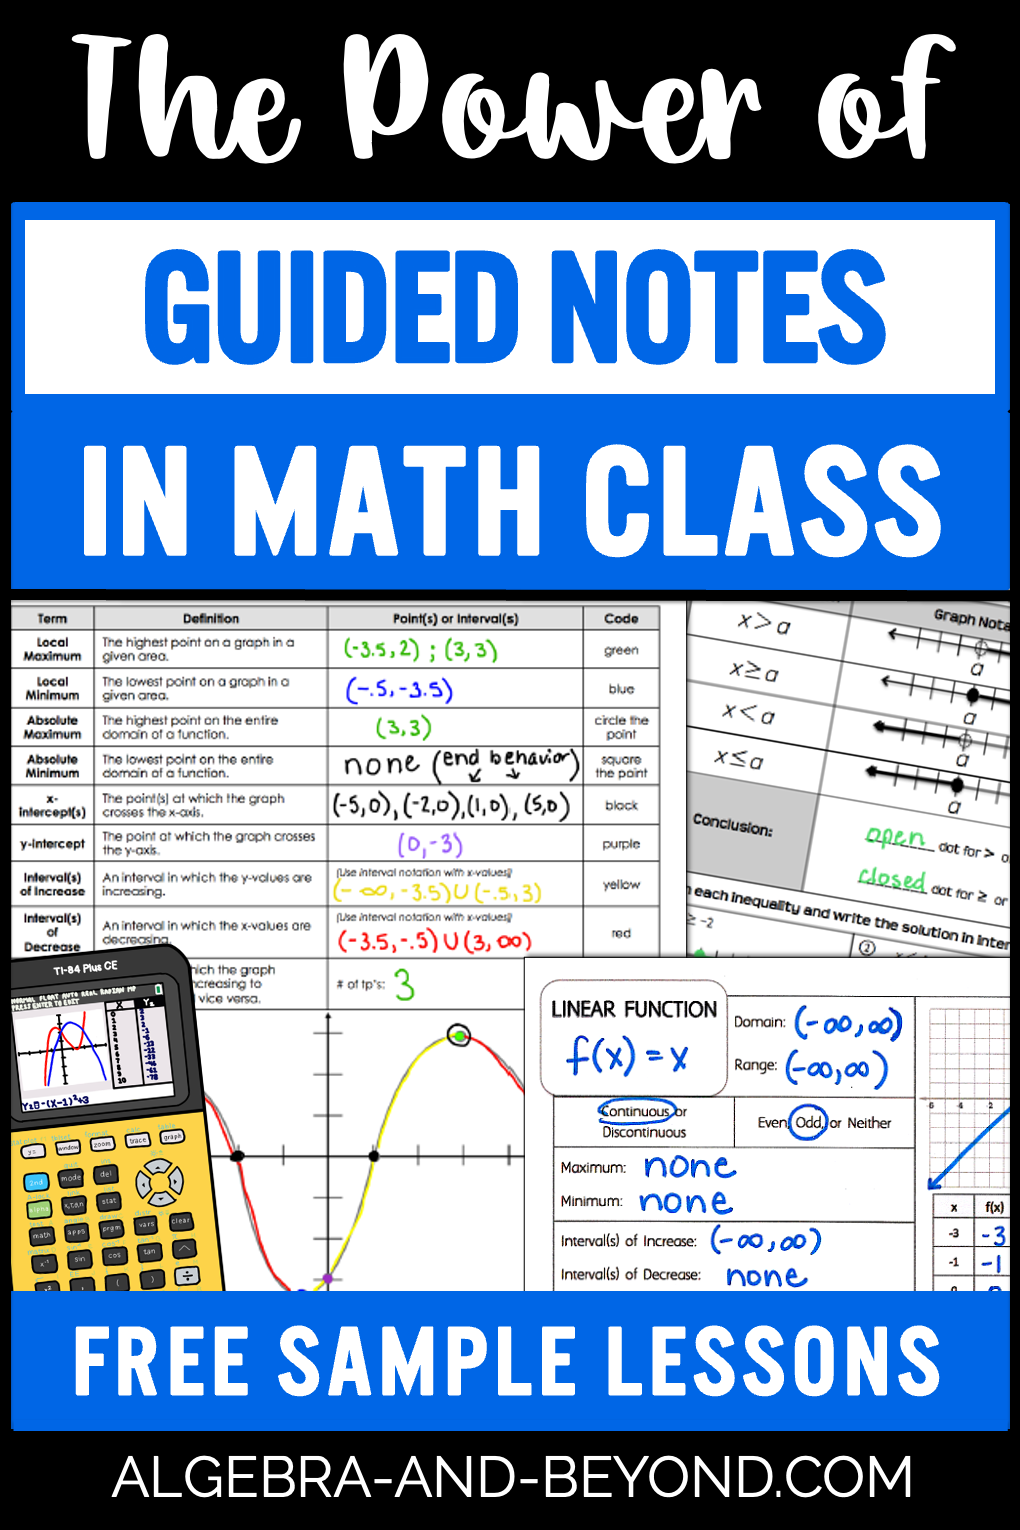 The Power of Guided Notes in Math Class